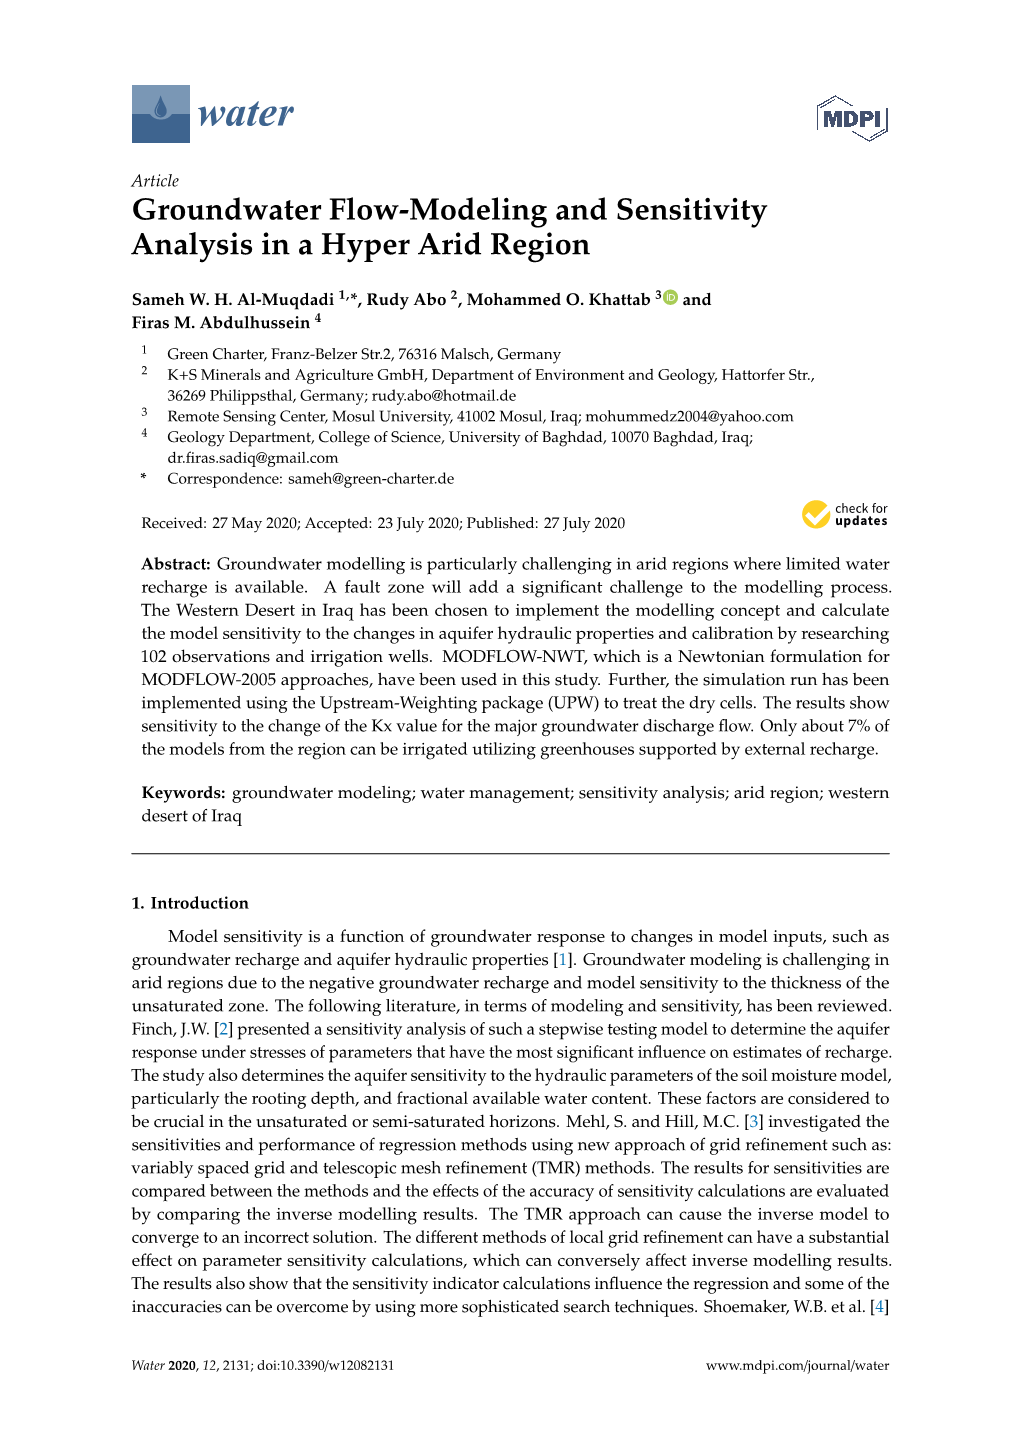 Groundwater Flow-Modeling and Sensitivity Analysis in a Hyper Arid Region